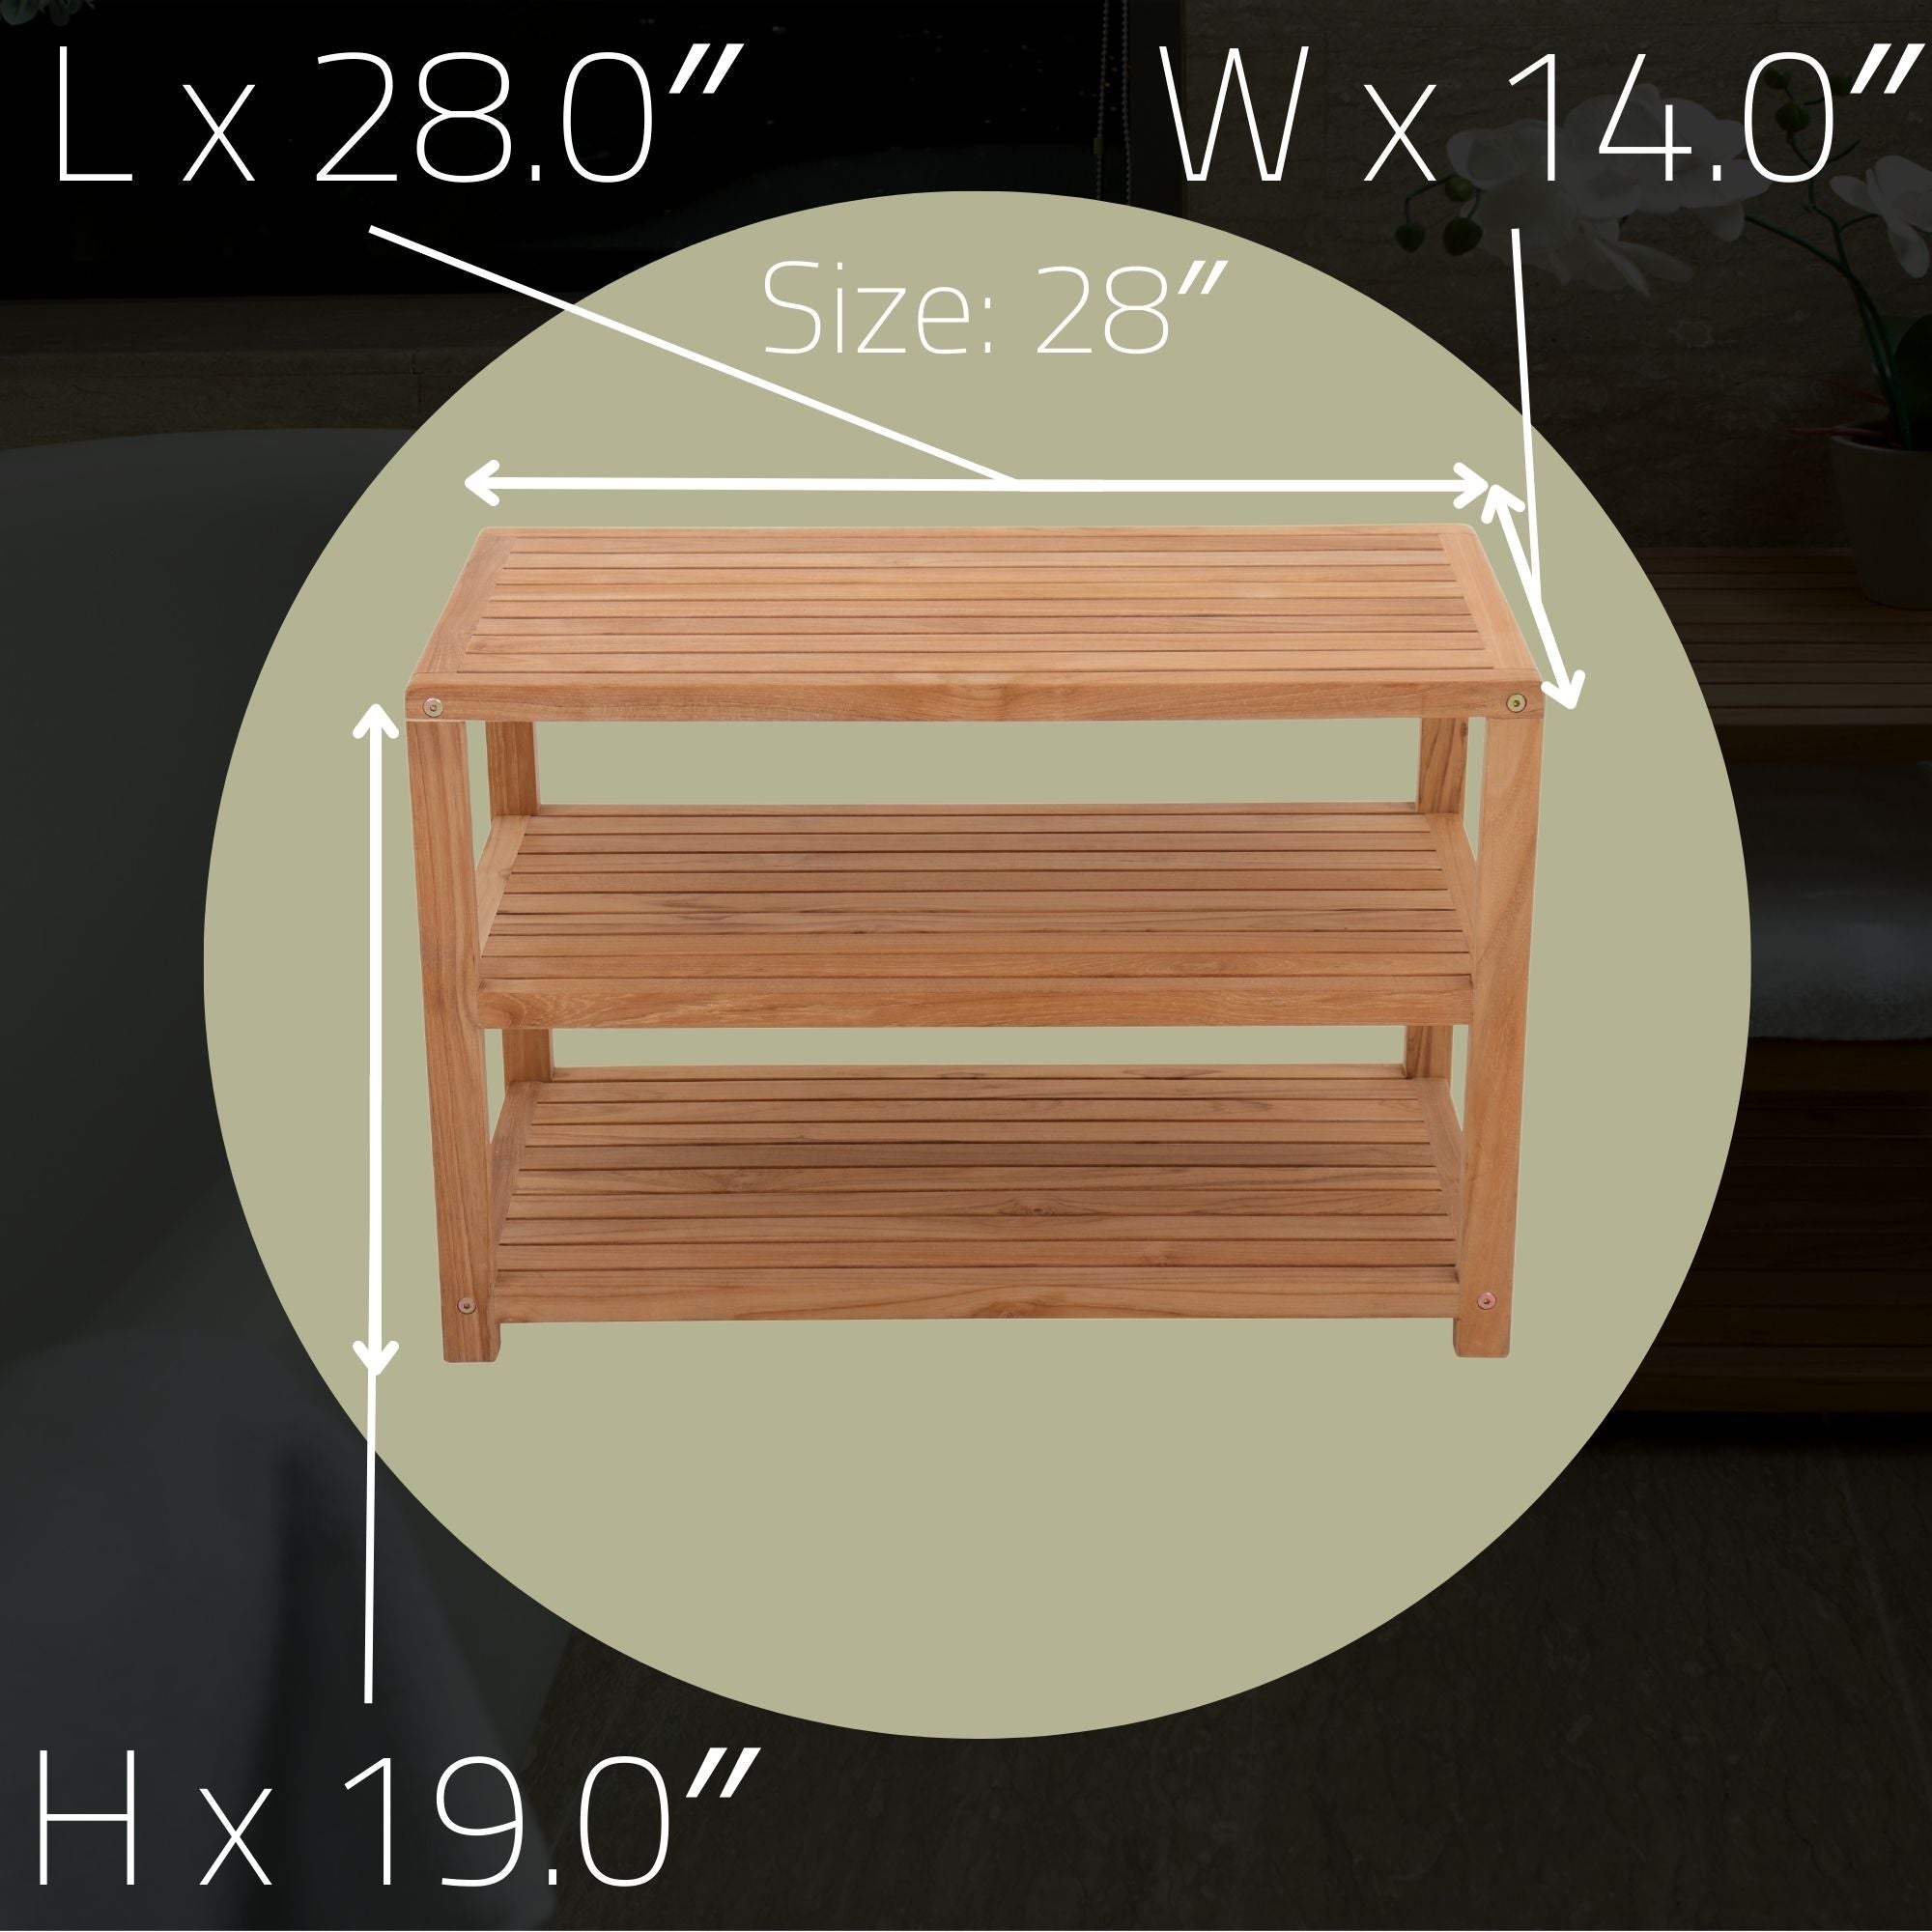 Savannah Natural Teak Shower and Spa/Bathroom/Outdoor - Storage Bench with Shelves- 28" or 40"